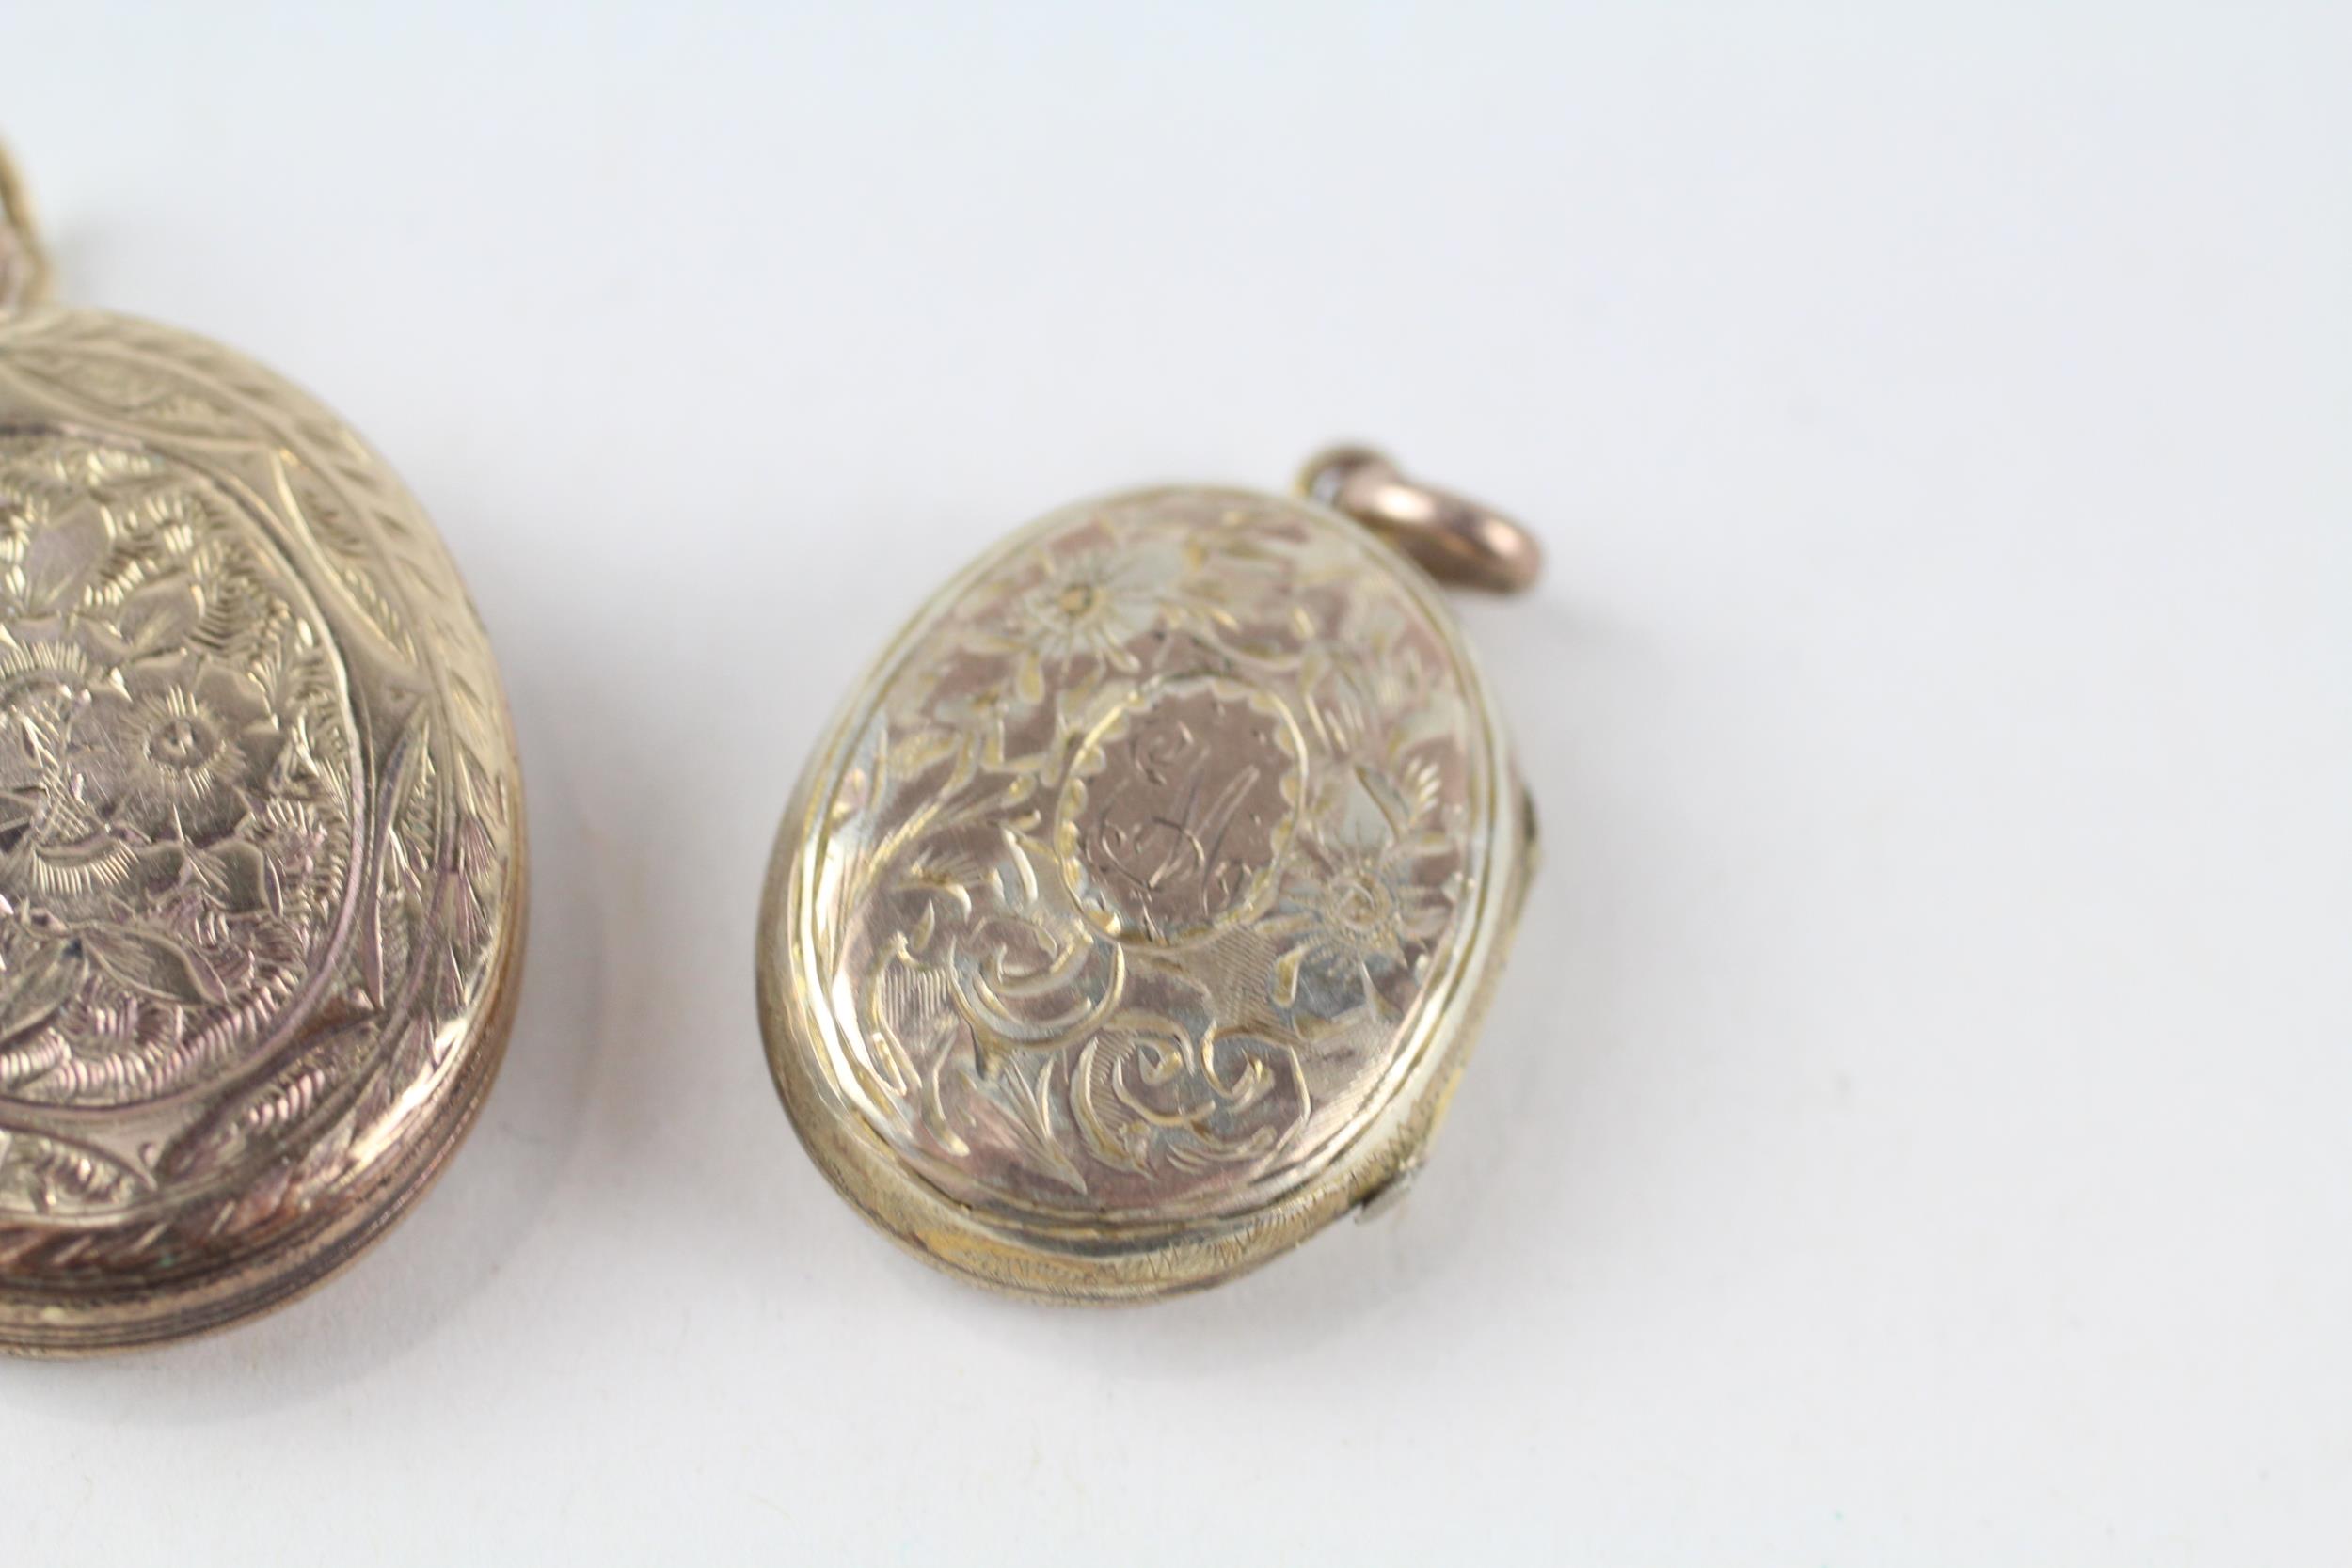 2x 9ct gold back & front antique patterned lockets (11.1g) - Image 2 of 4